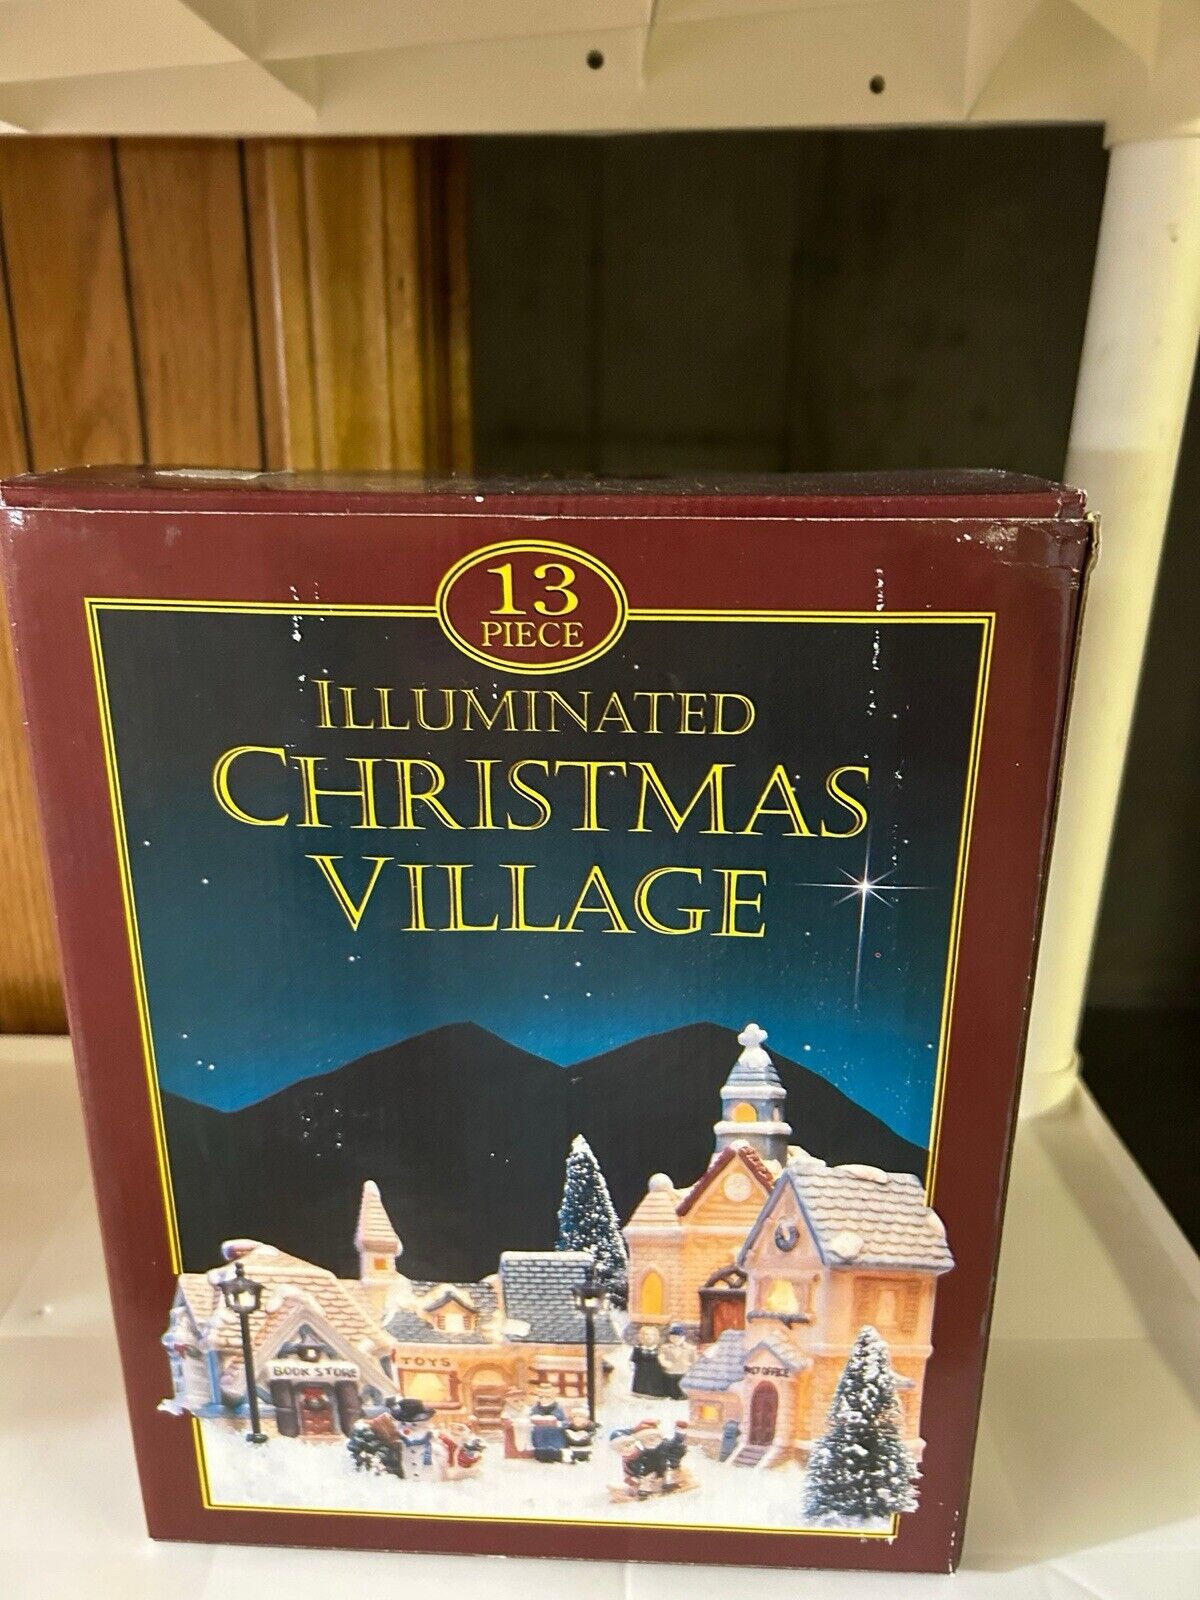 13 Piece CHRISTMAS VILLAGE Illuminated SET Toy Shop Book Store Town Square BOXED